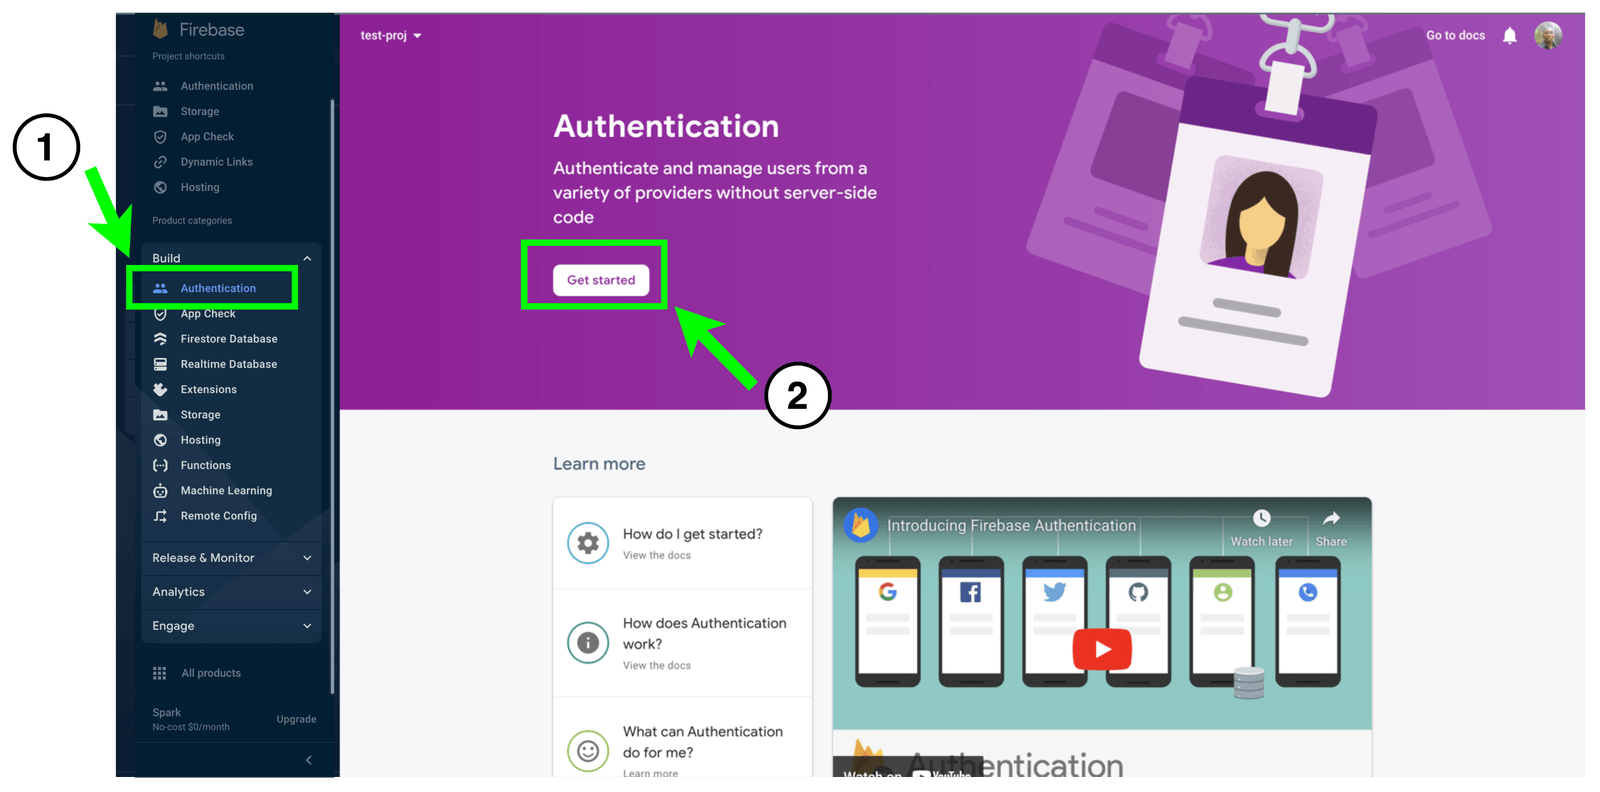 1 Authentication in left menu. 2 Get started.